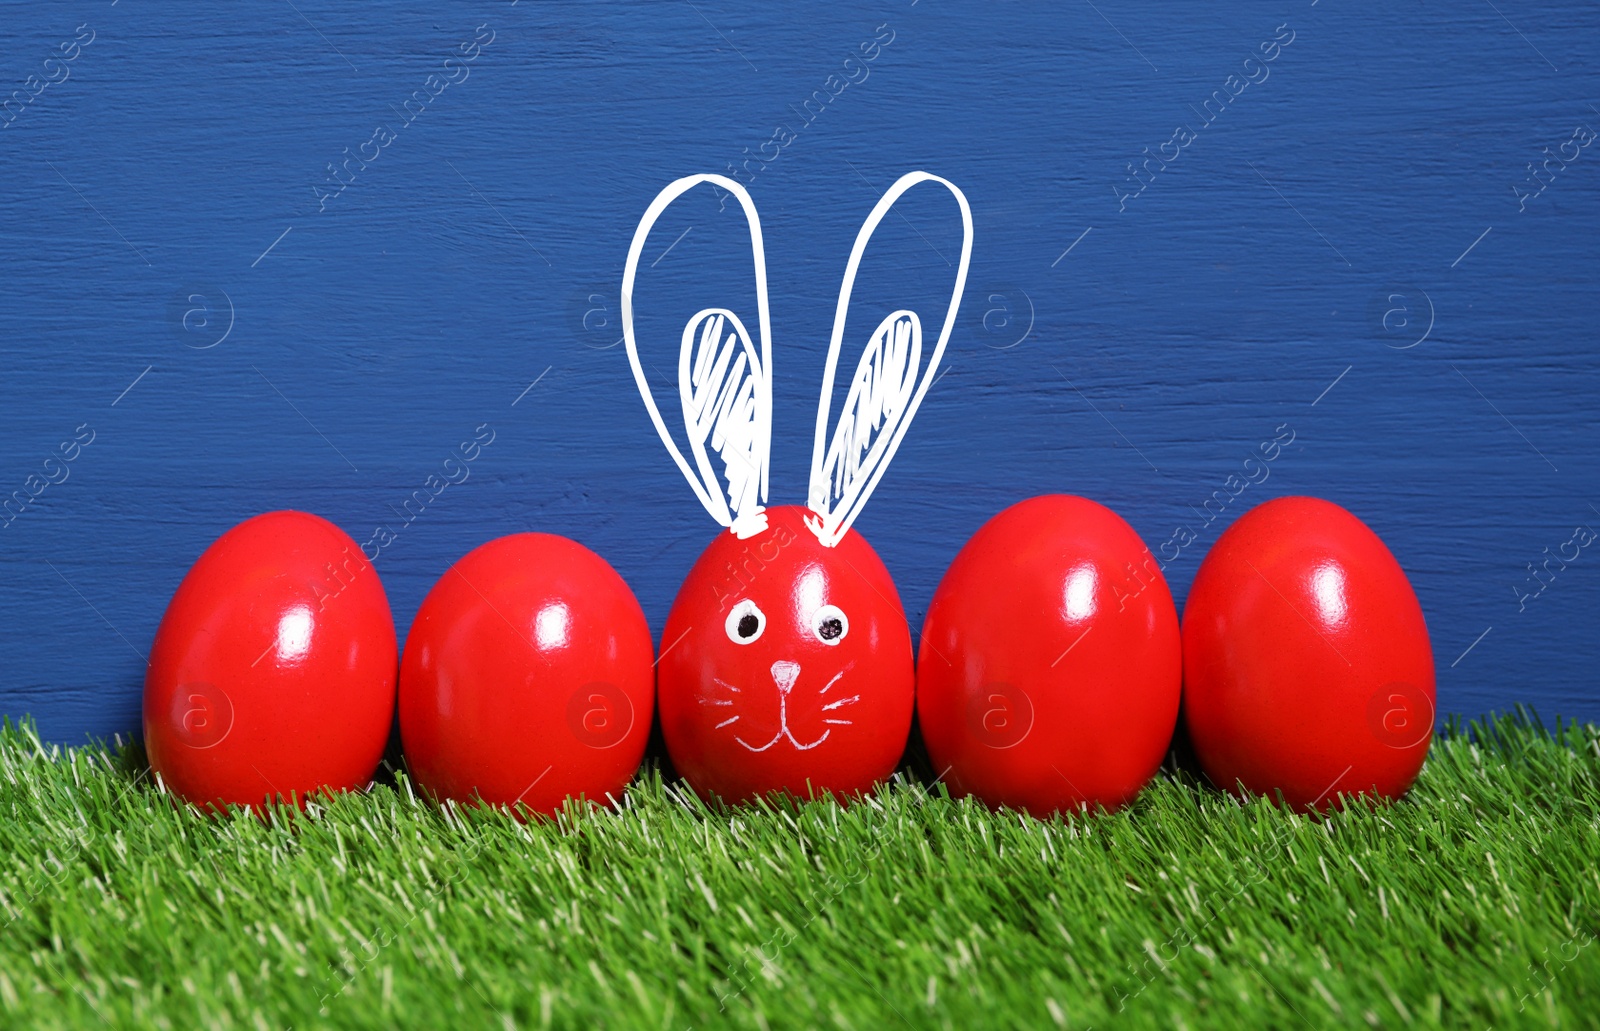 Image of One egg with drawn face and ears as Easter bunny among others on green grass against blue wooden background